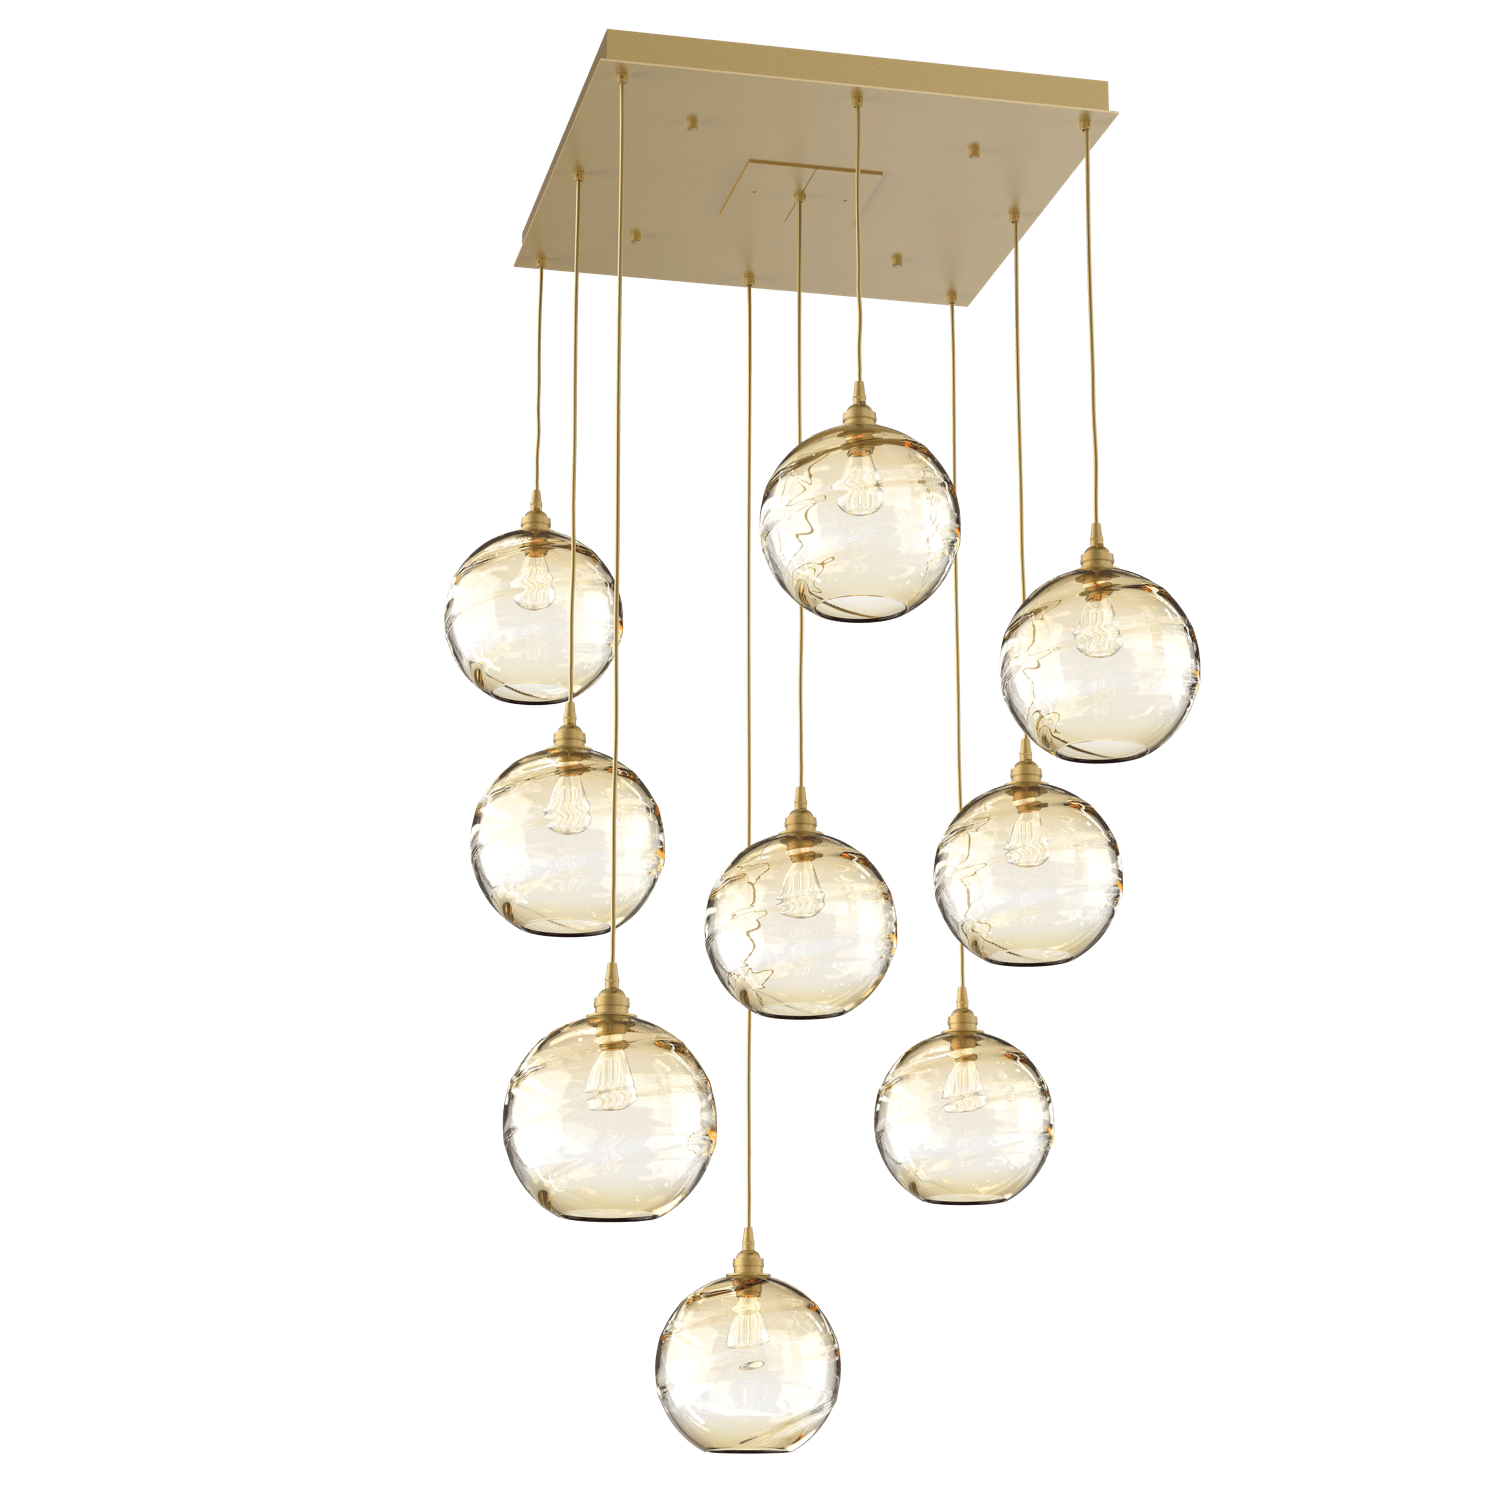 CHB0047-09-GB-OA-Hammerton-Studio-Optic-Blown-Glass-Terra-9-light-square-pendant-chandelier-with-gilded-brass-finish-and-optic-amber-blown-glass-shades-and-incandescent-lamping